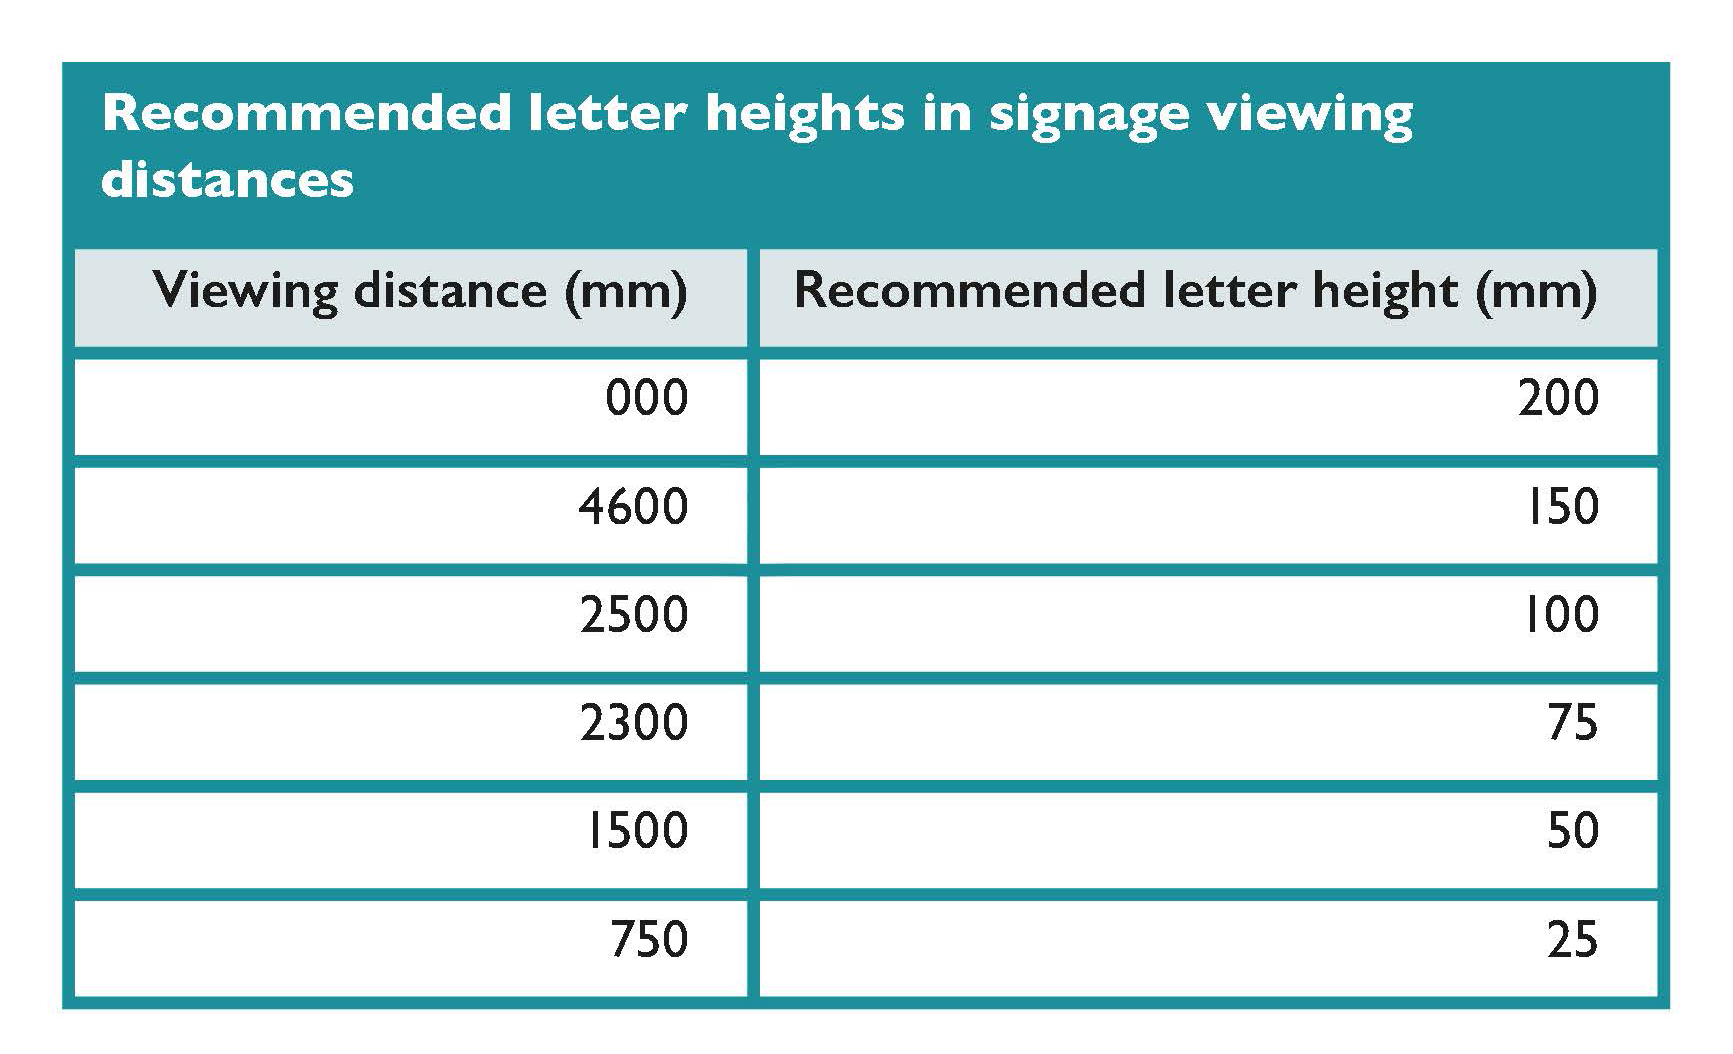 Recommended letter heights in signage viewing distances.